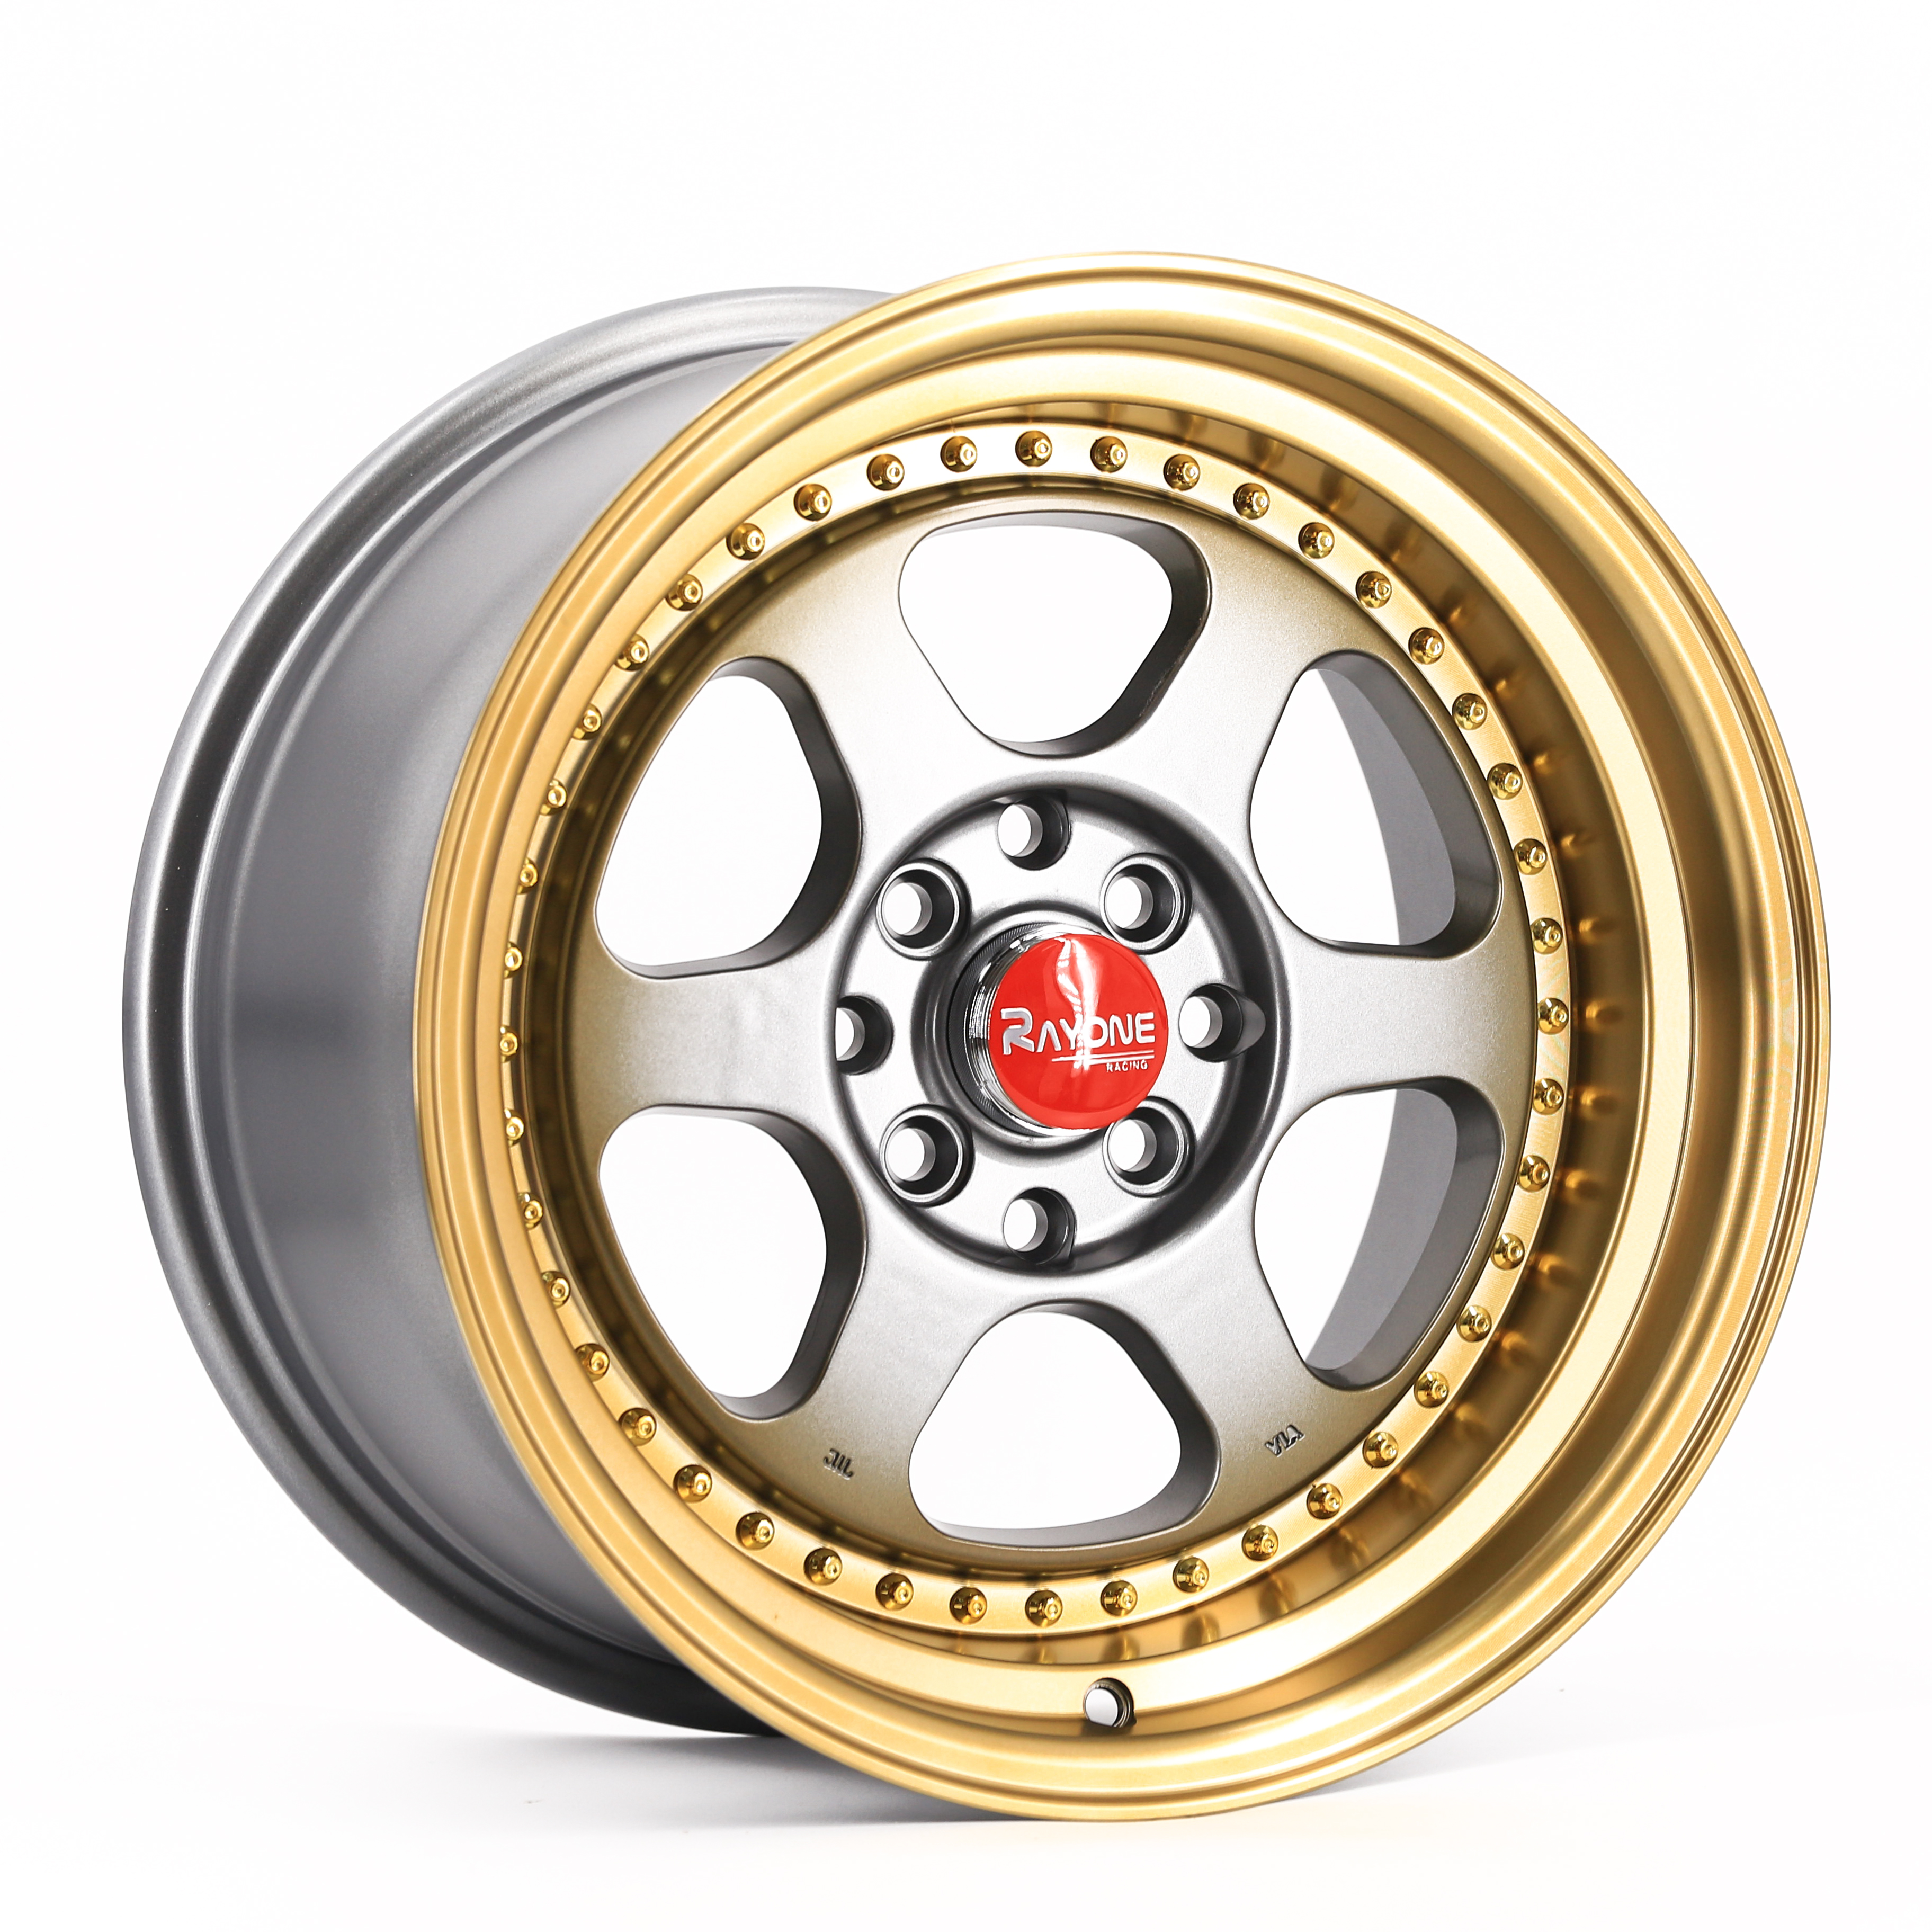 2021 High quality 20 Inch Alloy Rims - Gold Color Deep Dish Rivets 4 Hole Rims 15 Inch Alloy Wheels For Racing Car – Rayone